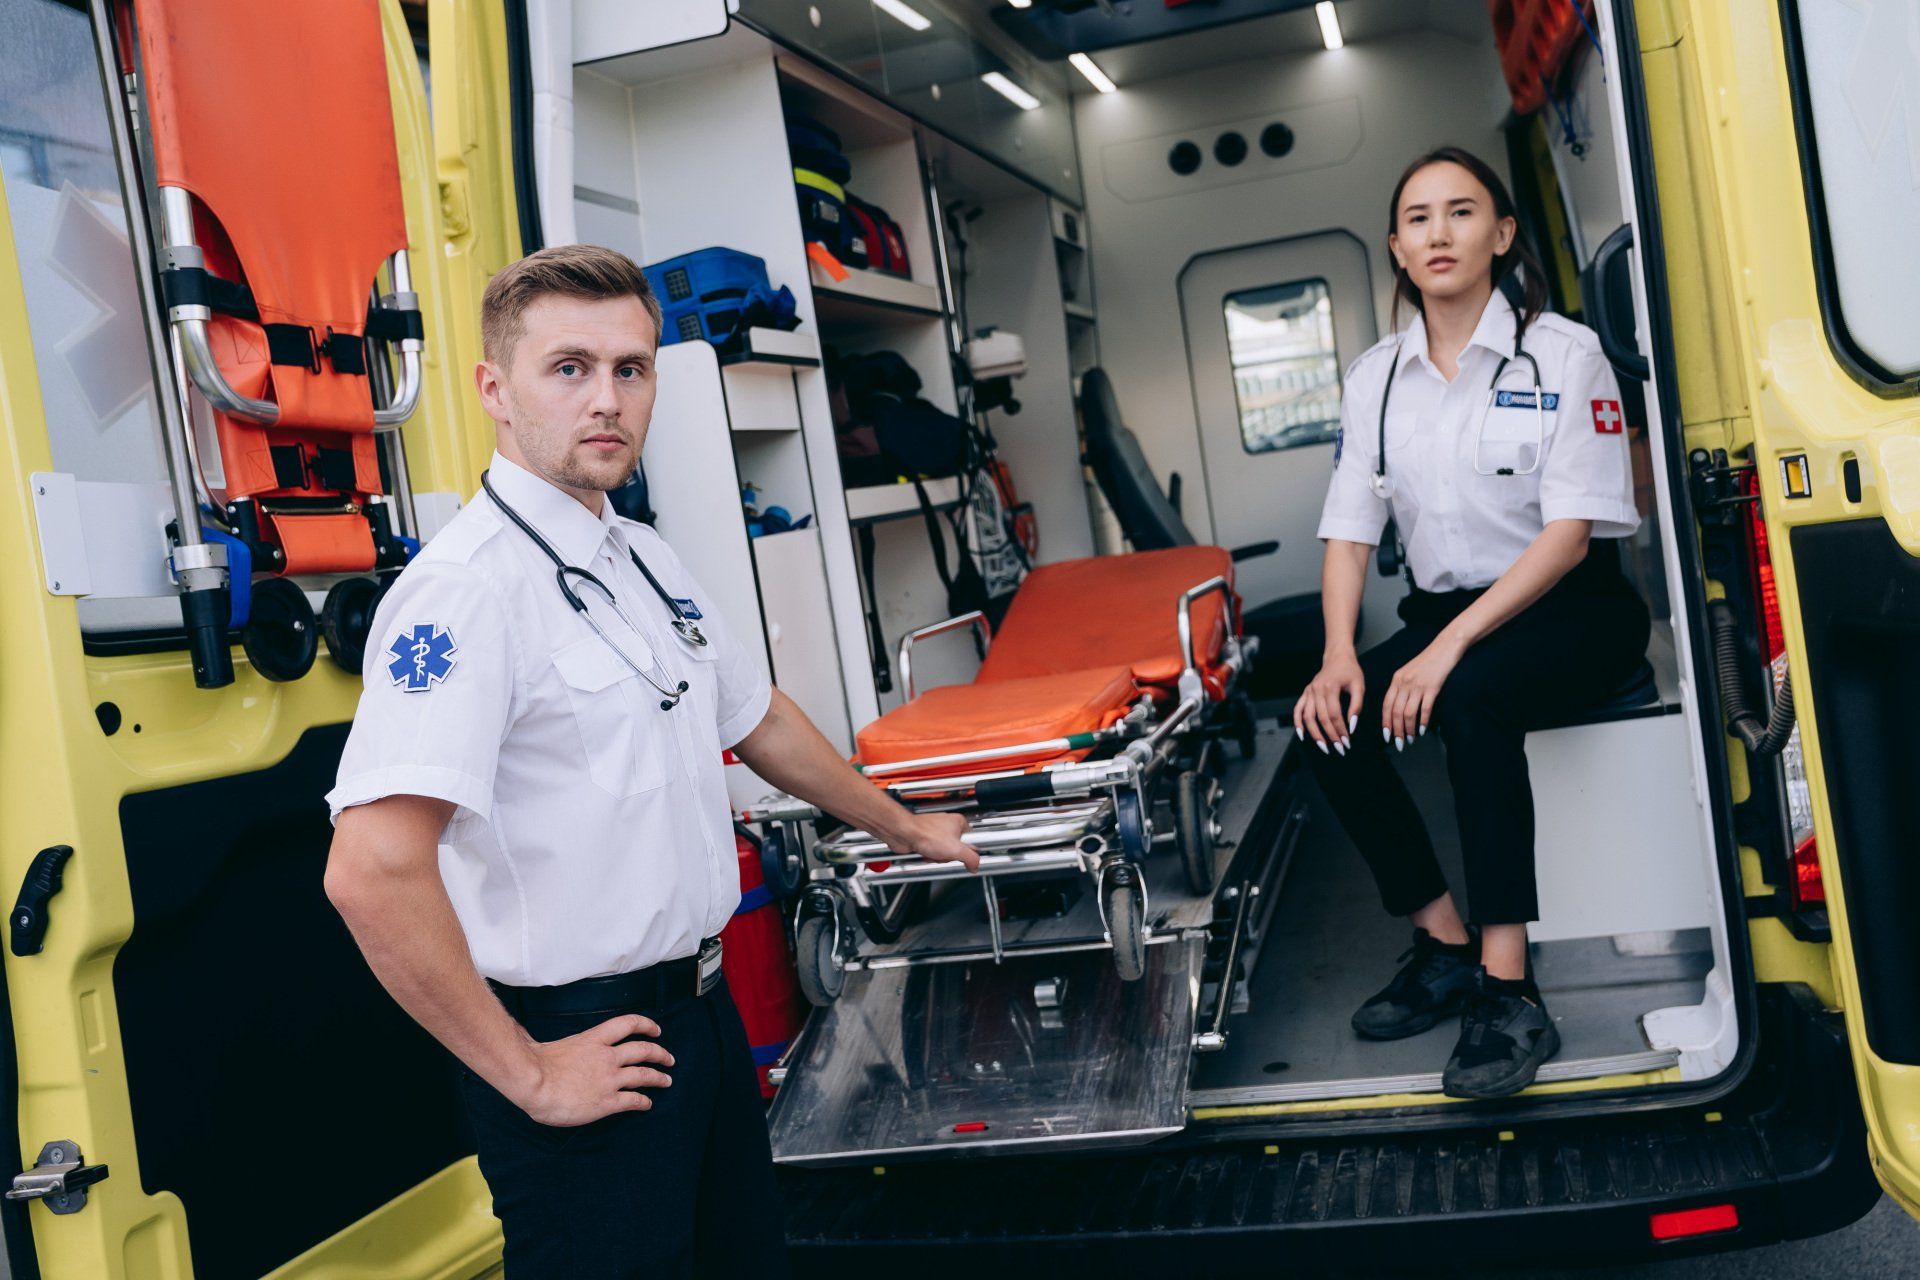 two paramedics sitting at the back of an ambulance with the doors open